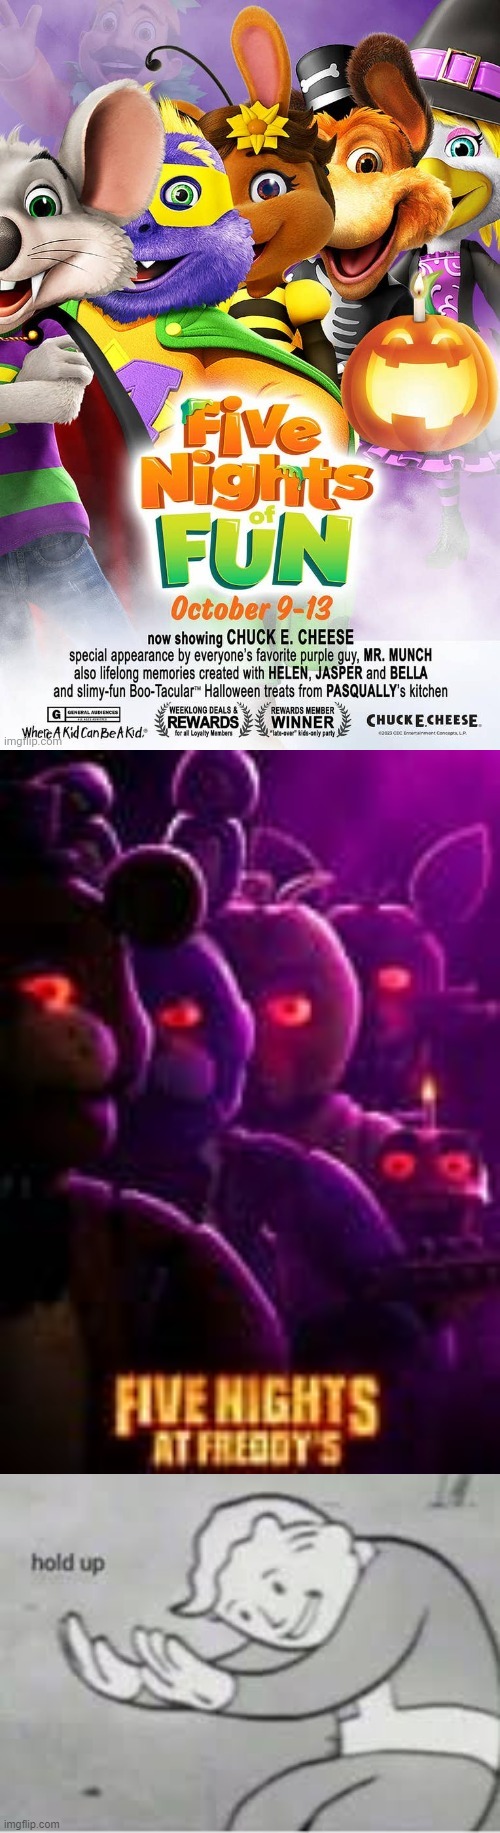 the chuck e cheese copied the fnaf movie poster | image tagged in hol up | made w/ Imgflip meme maker